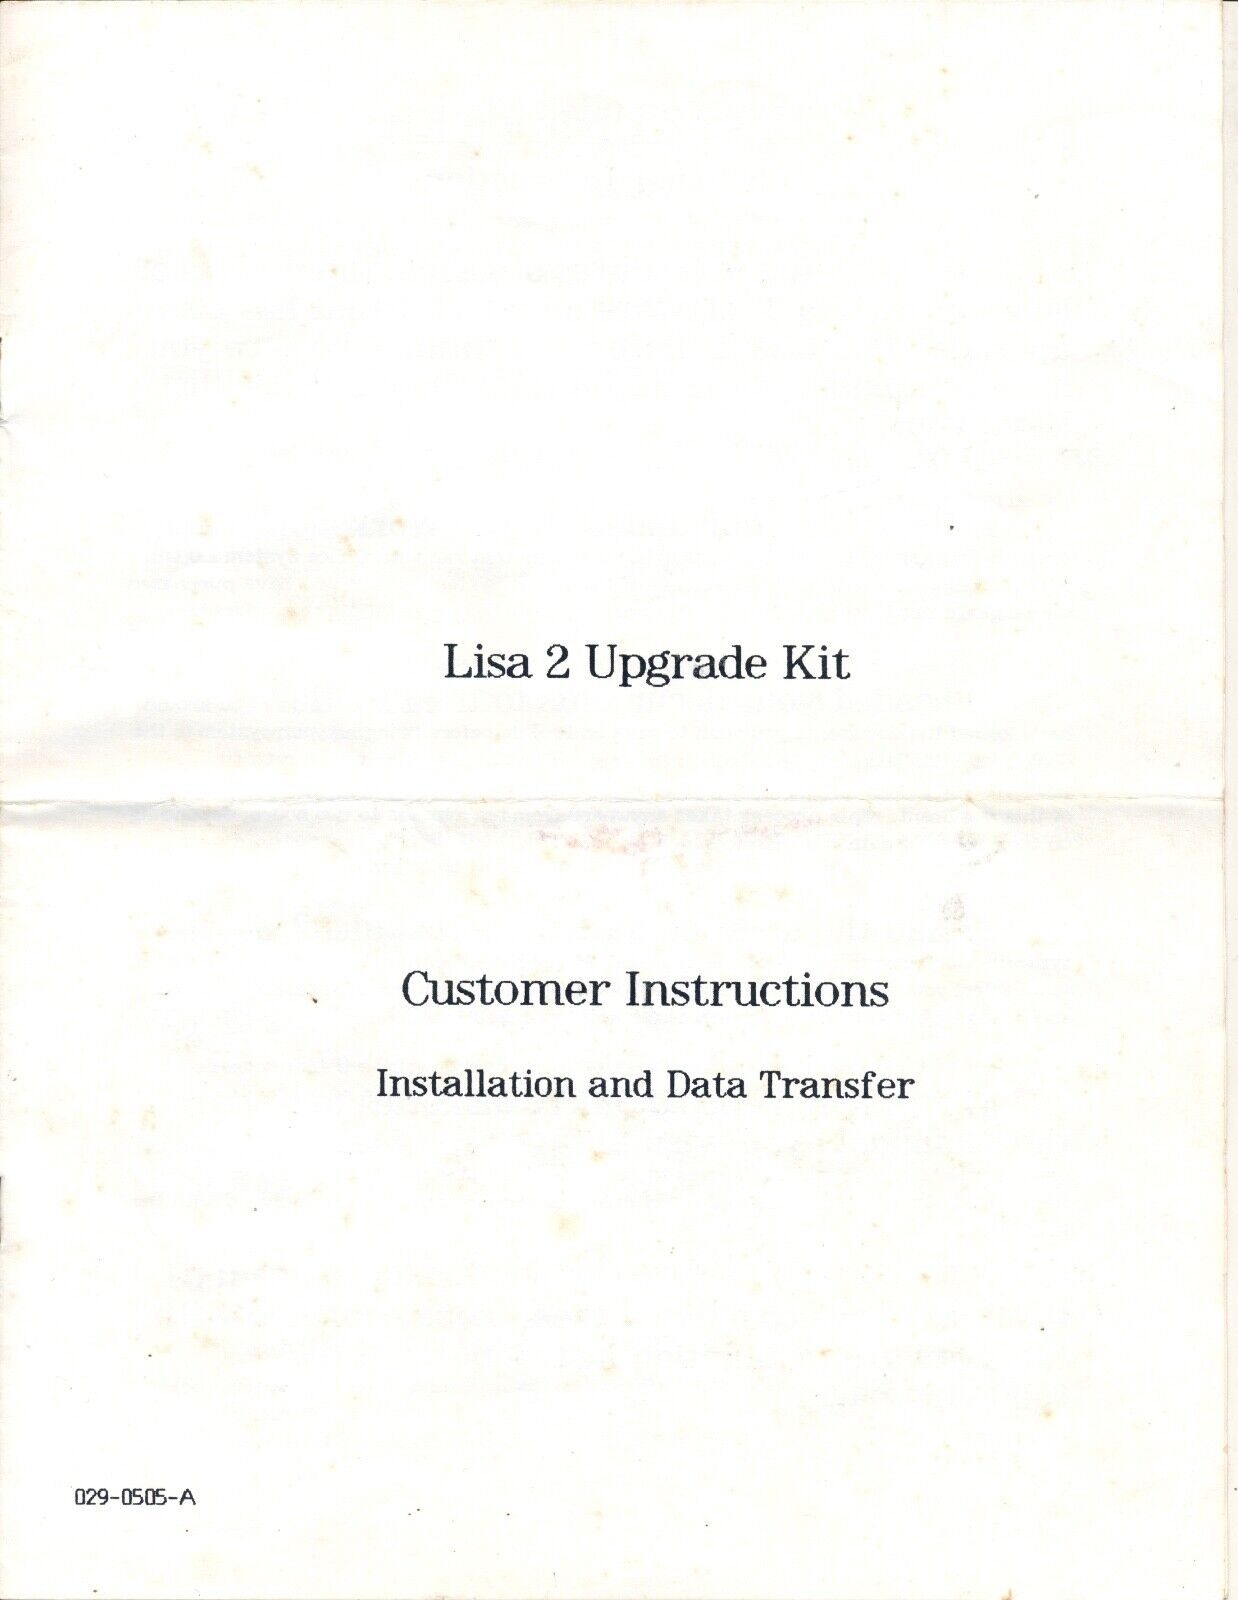 Original Manual for Lisa 1 Upgrade to Lisa 2 - 7 Pages - NOT A COPY